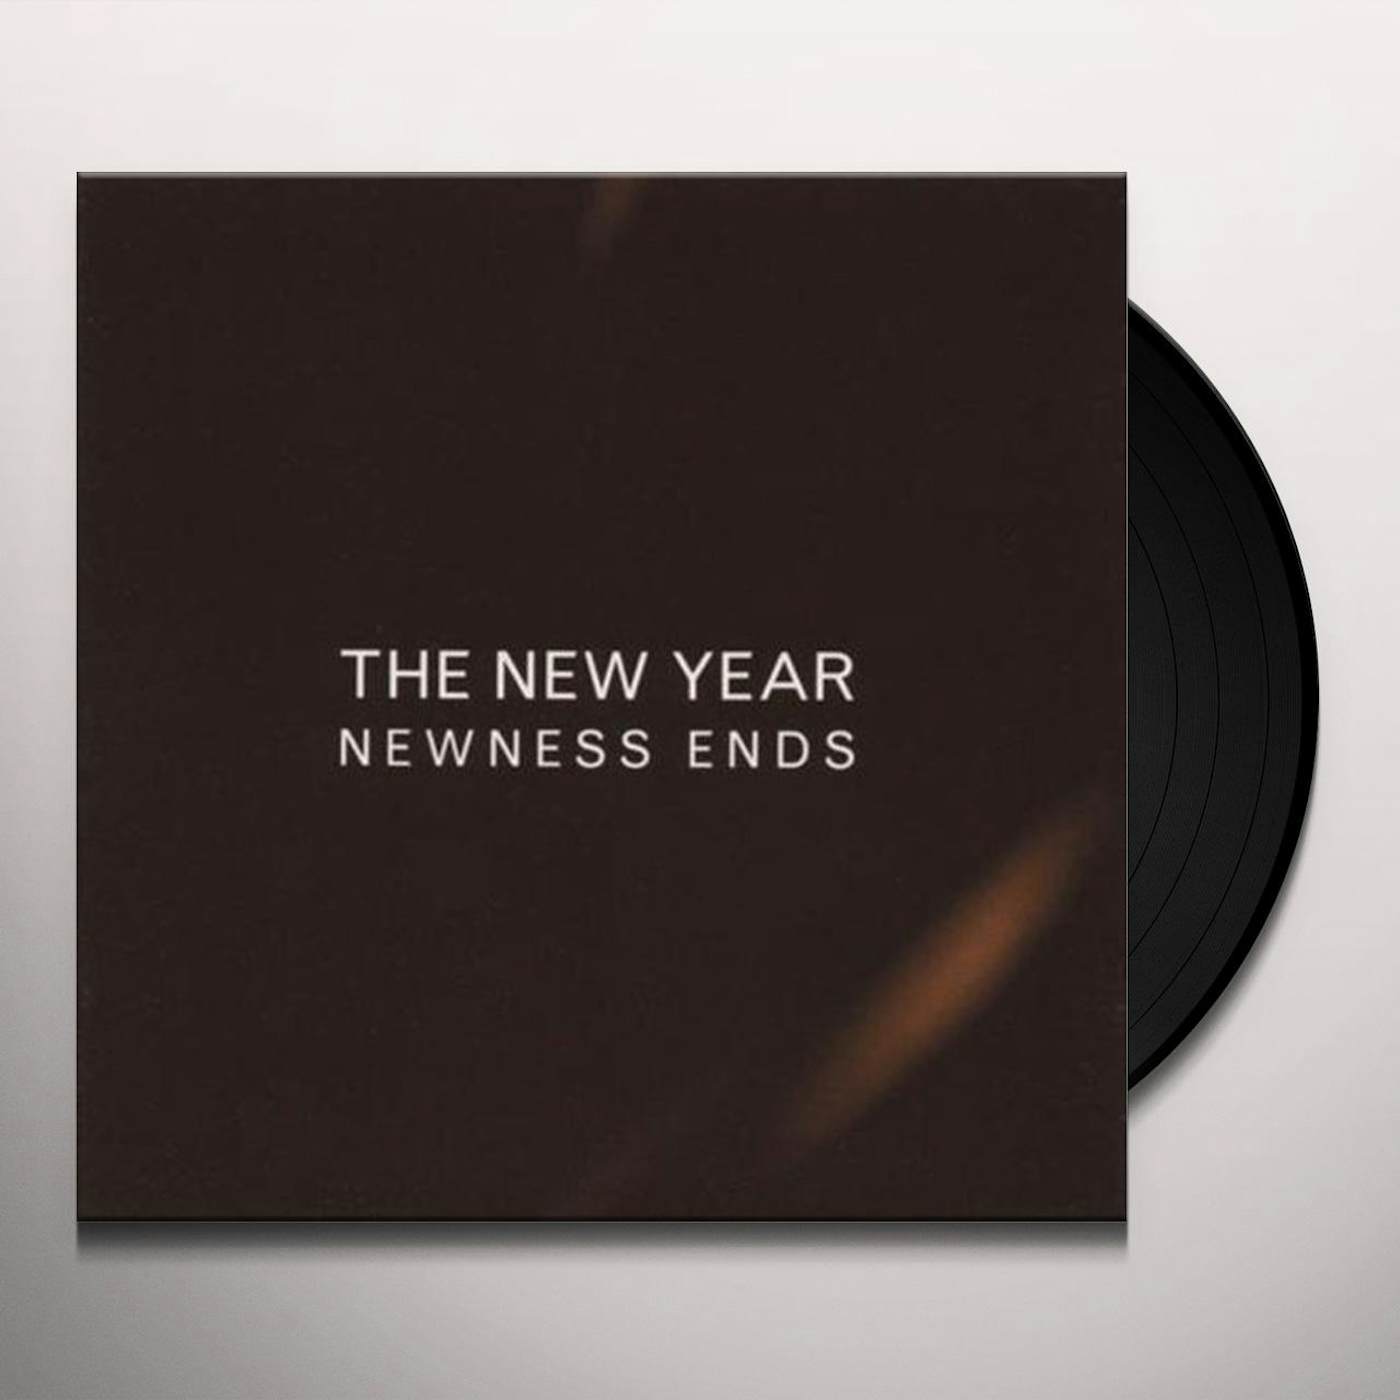 The New Year Newness Ends Vinyl Record